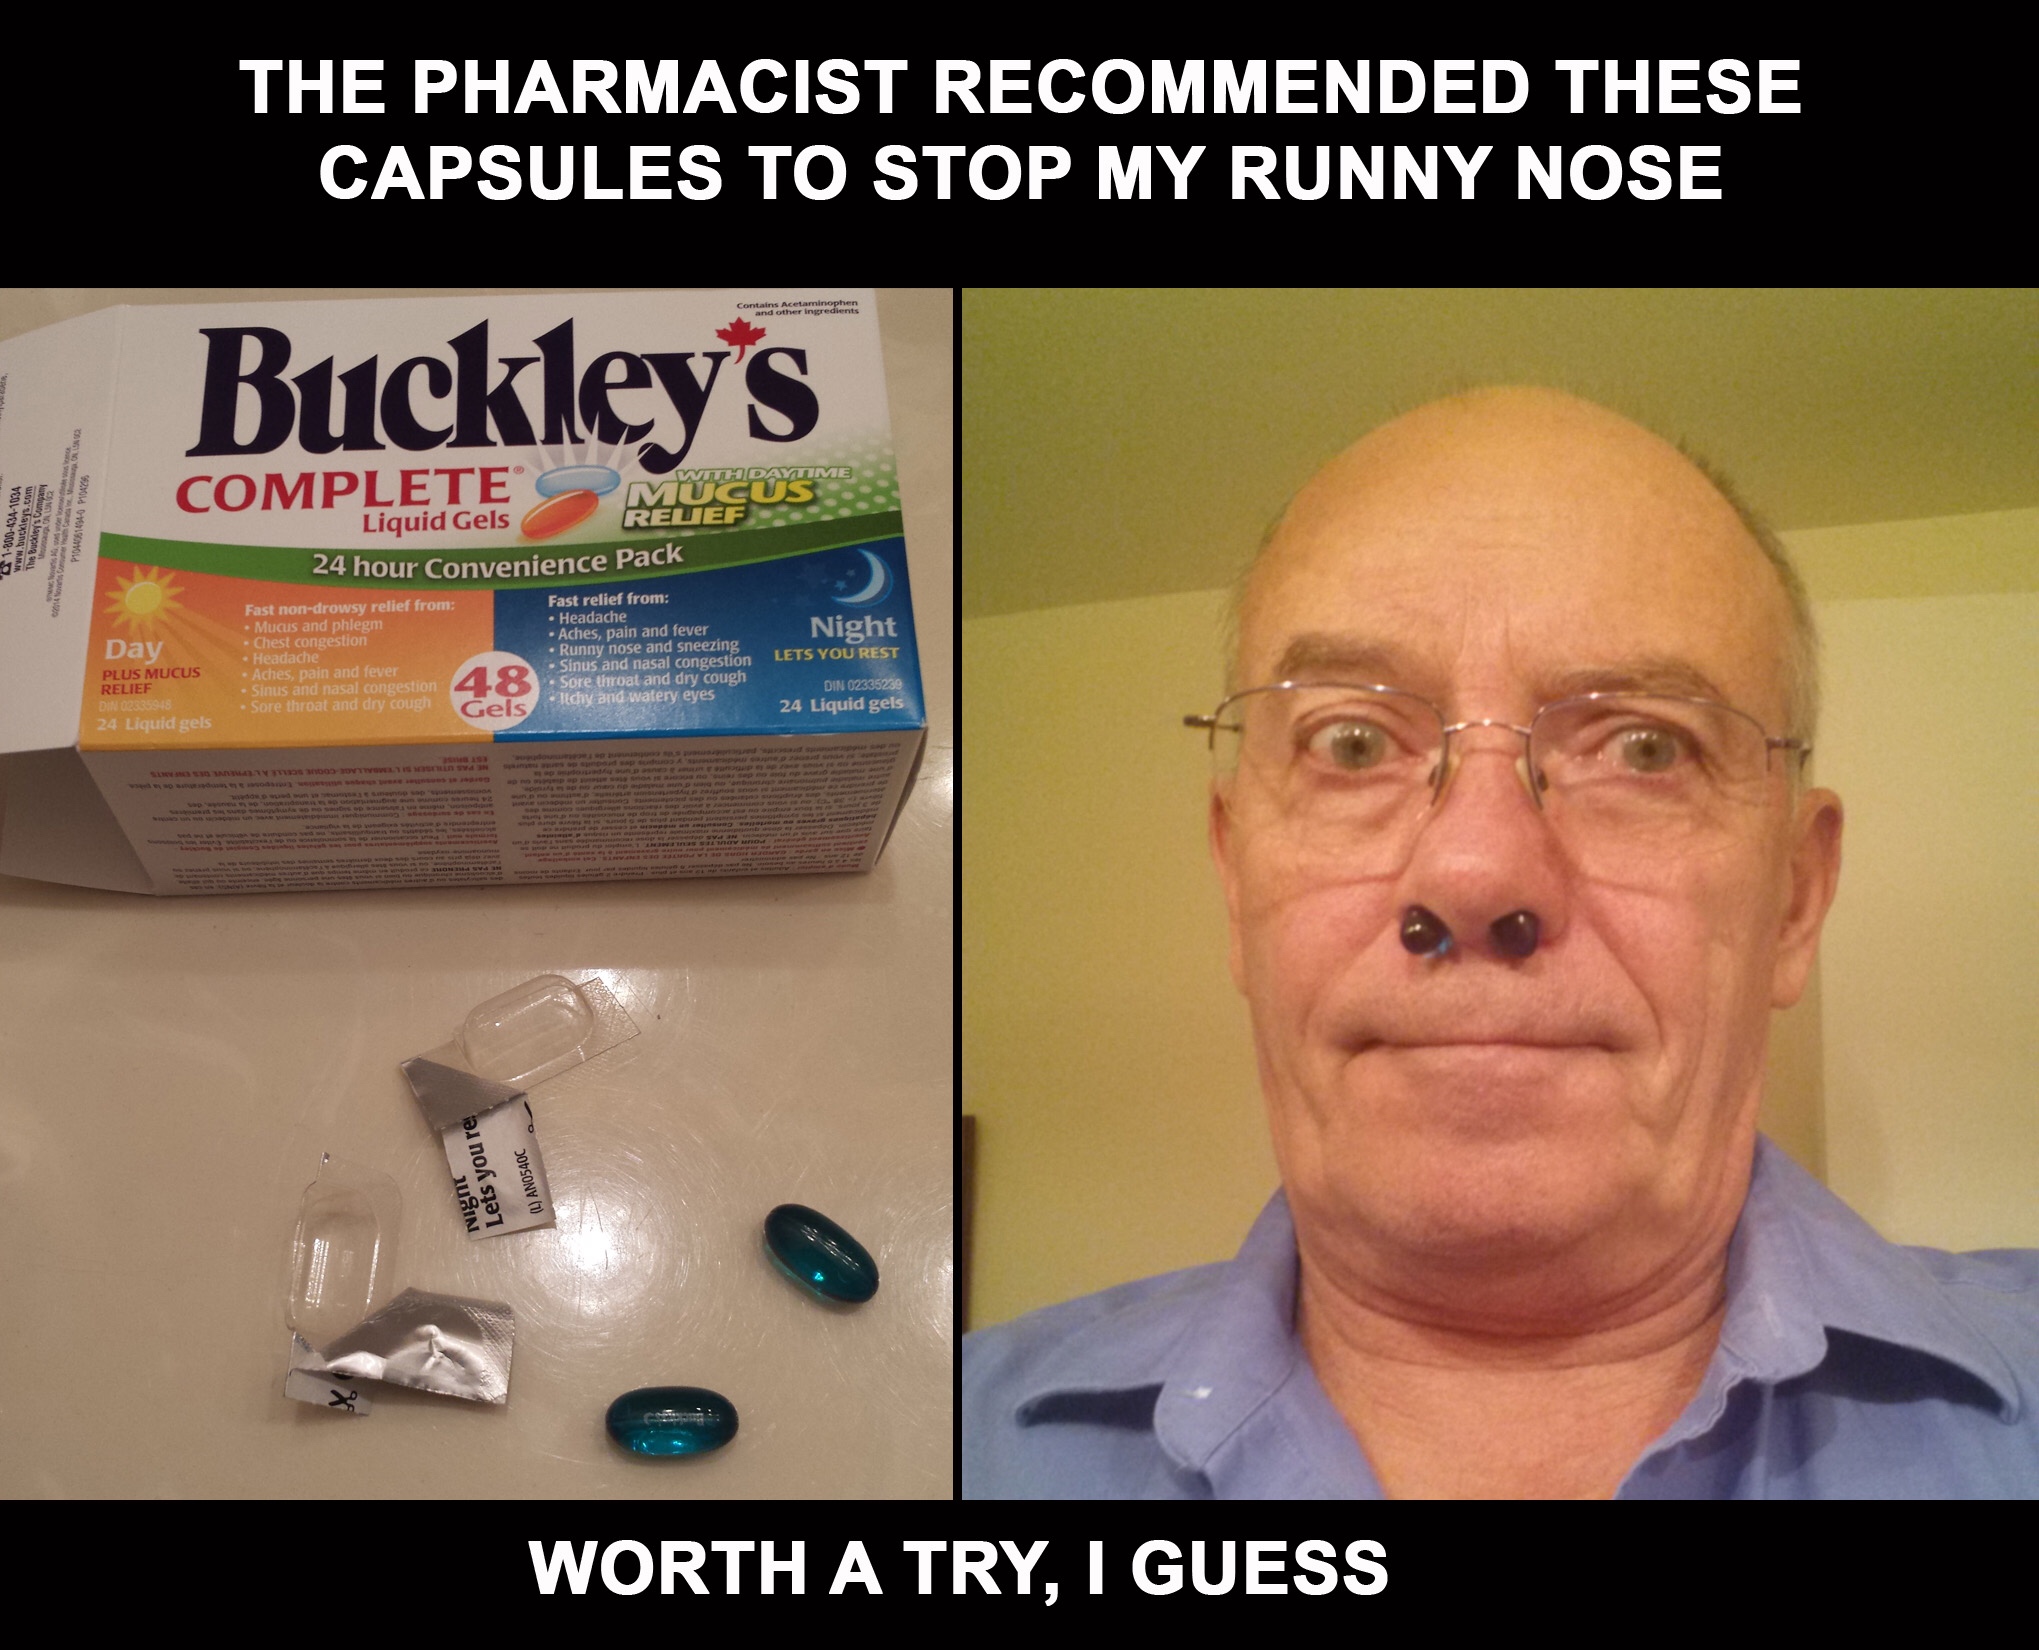 runny nose memes - The Pharmacist Recommended These Capsules To Stop My Runny Nose Buckley's Complete Liquid Gels 24 hour Convenience Pack Night Worth A Try, I Guess